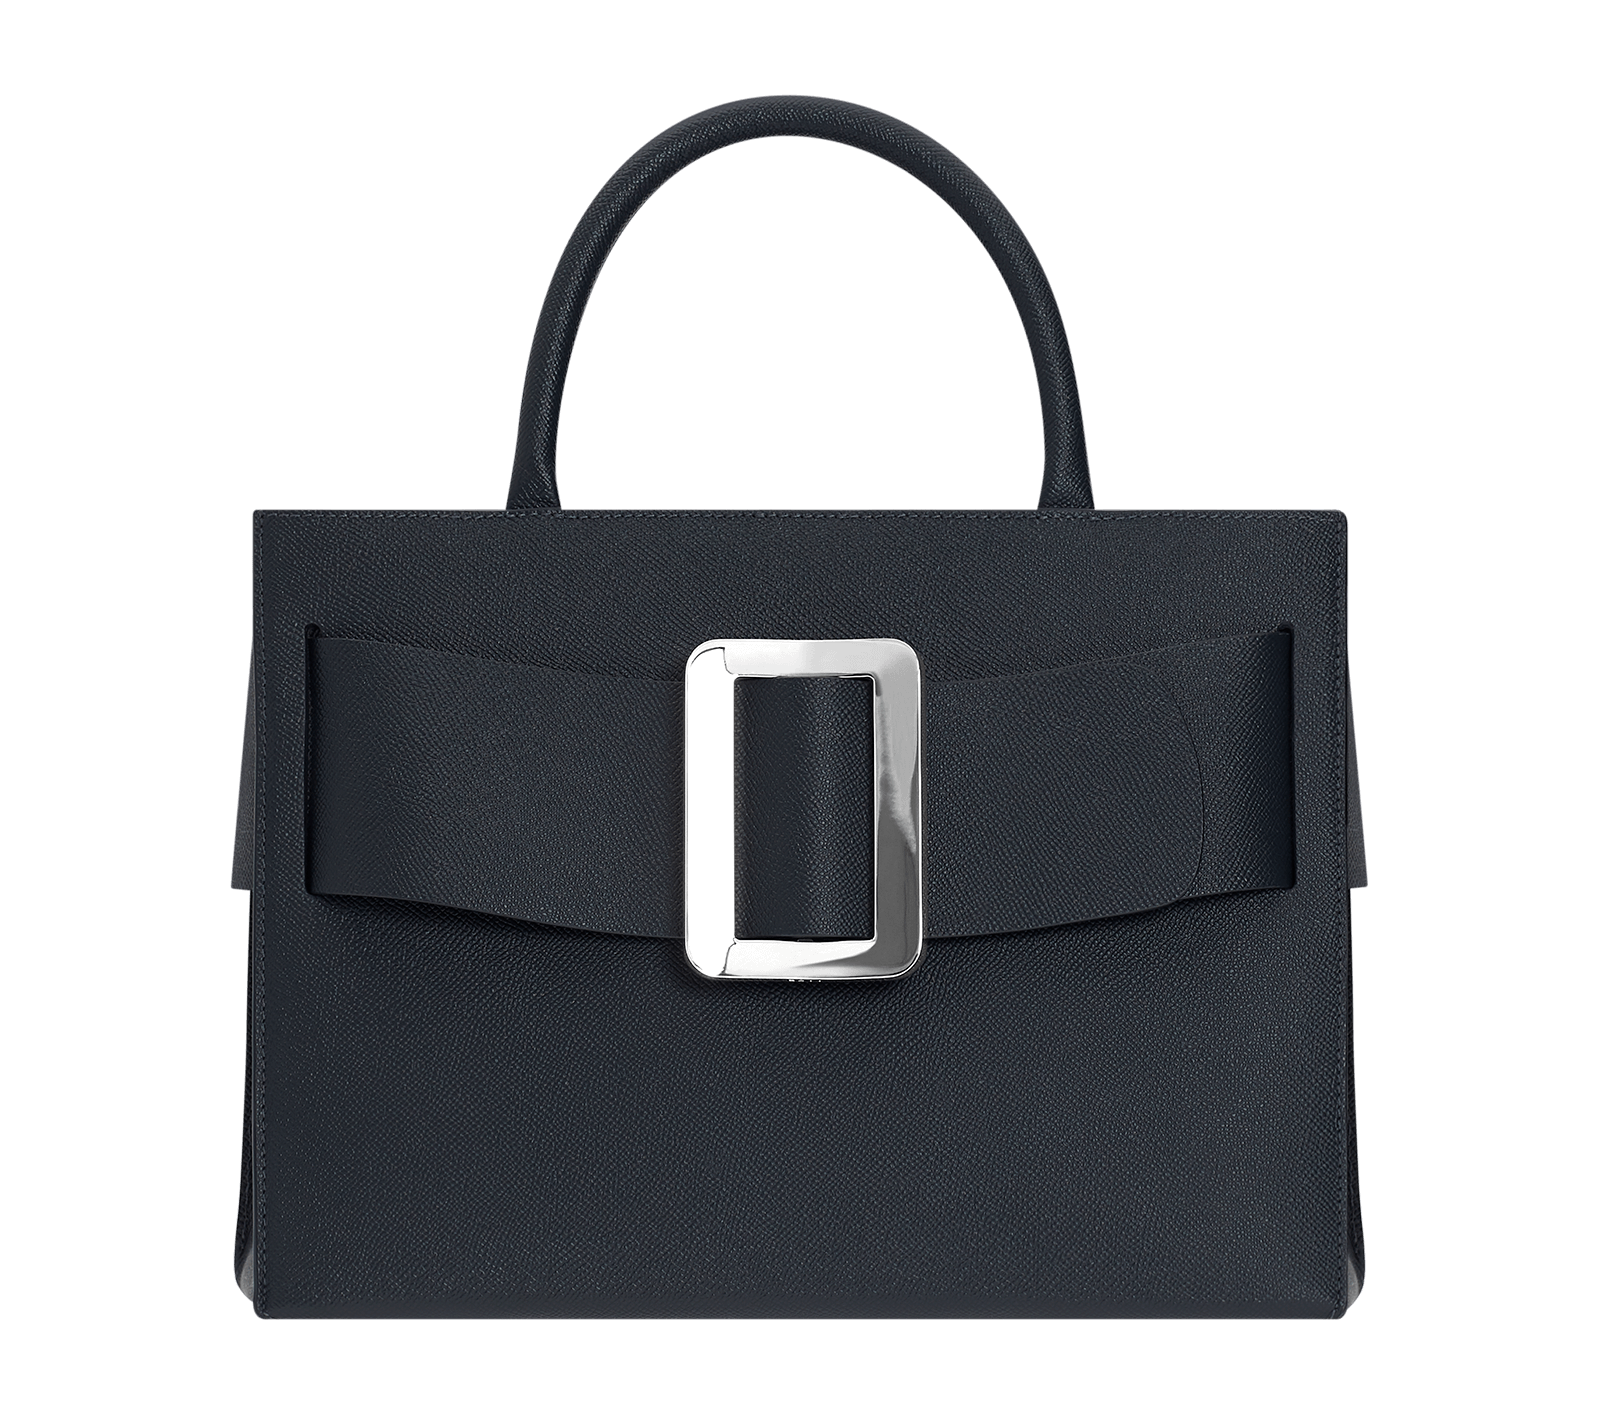 Large, structured blue handbag with a large silver buckle on the front, carry strap, and twin handles. Made with grained calfskin leather.